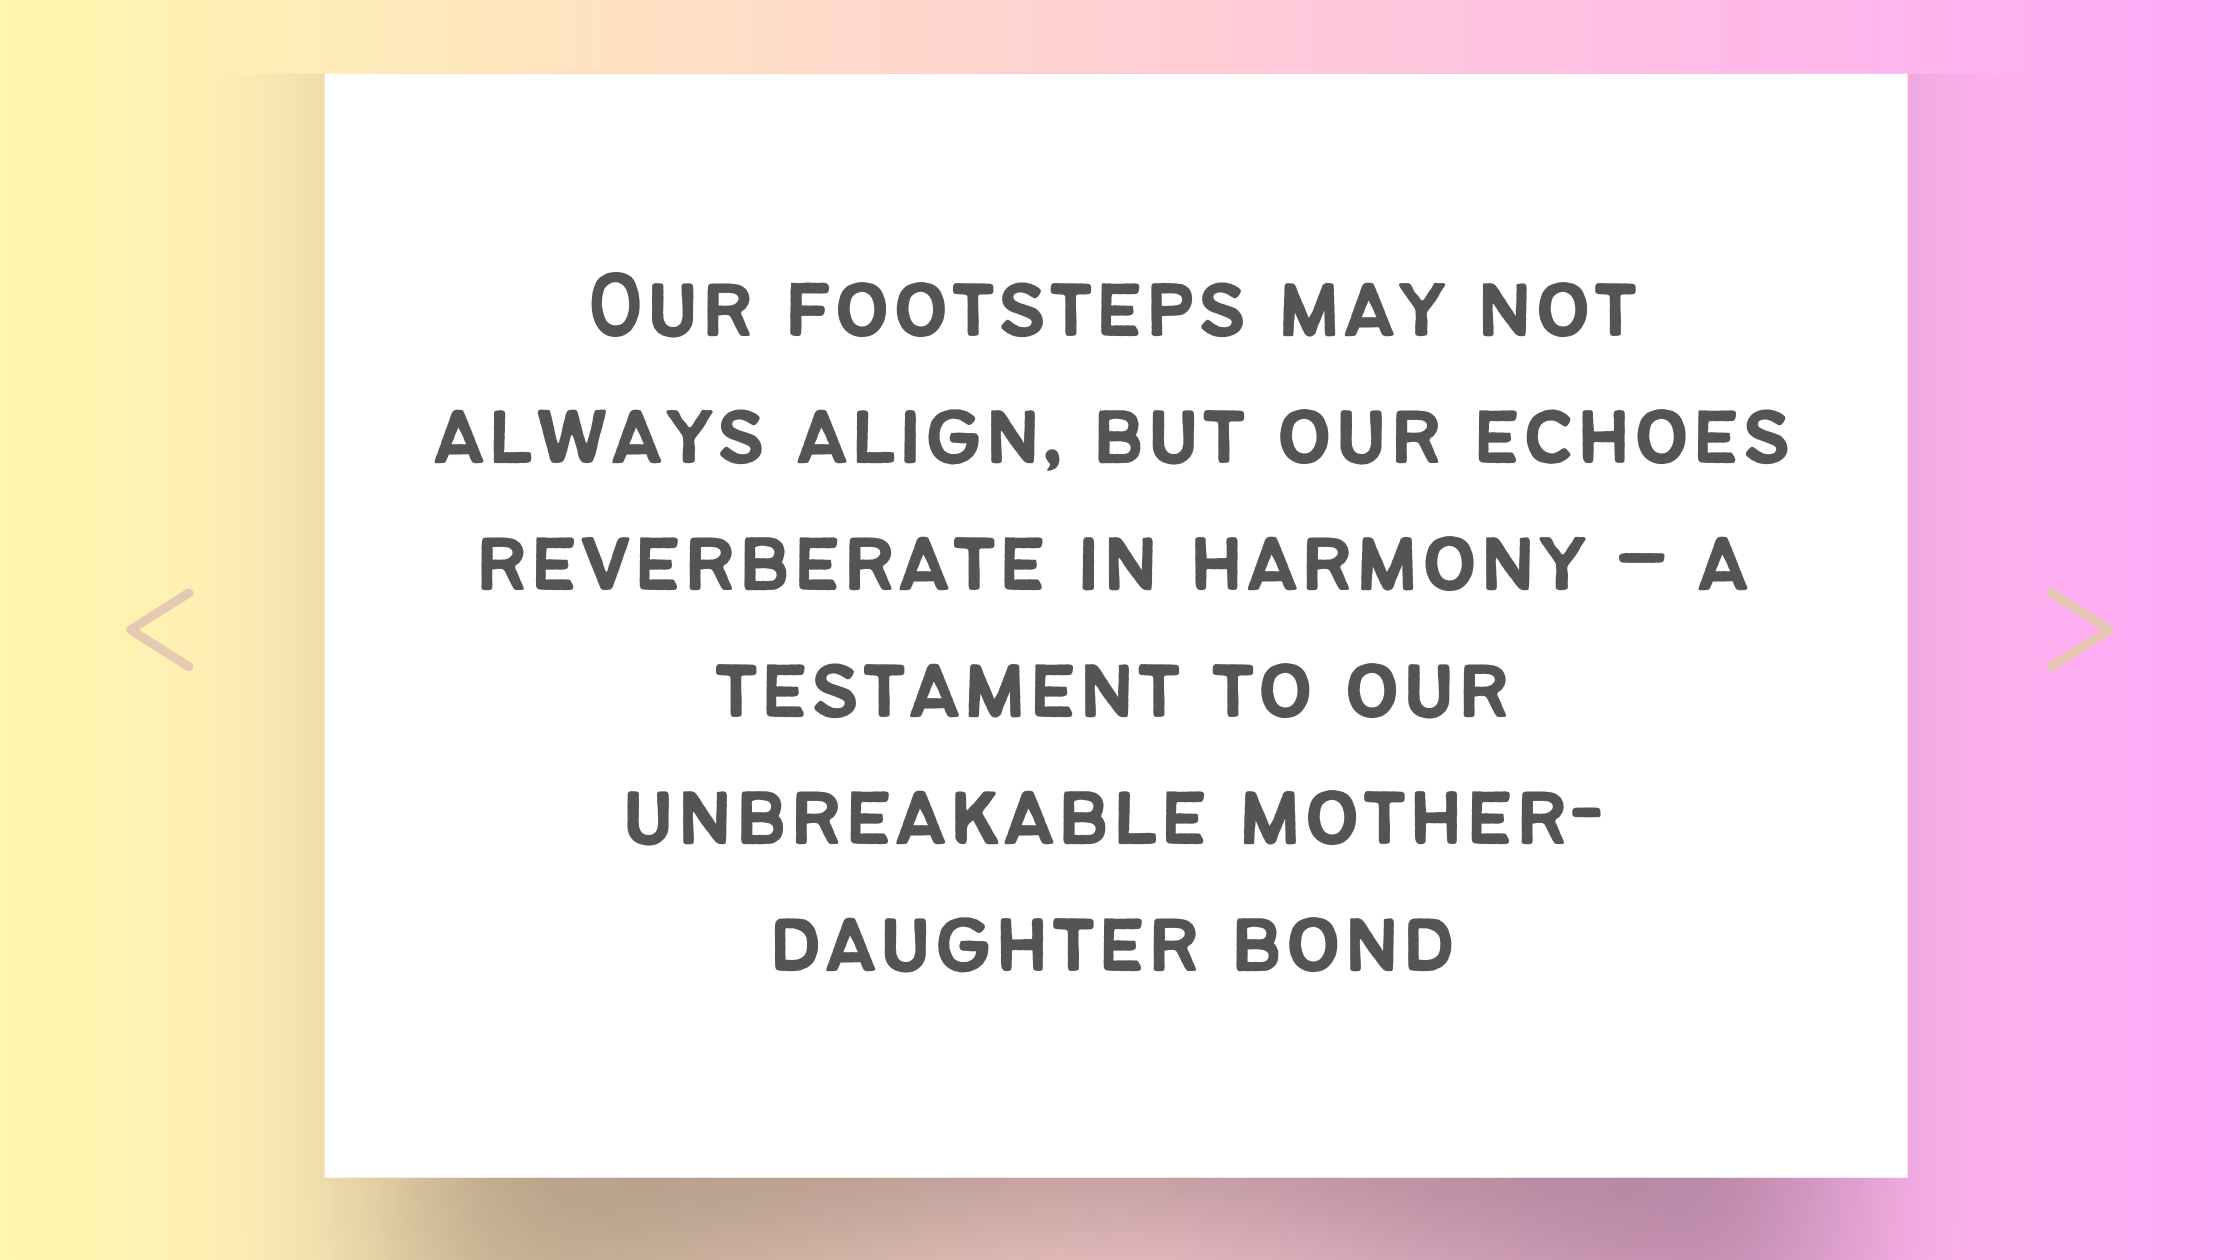 10 Expressive Quotes That Perfectly Capture the Unbreakable Mother-Daughter Bond🌸